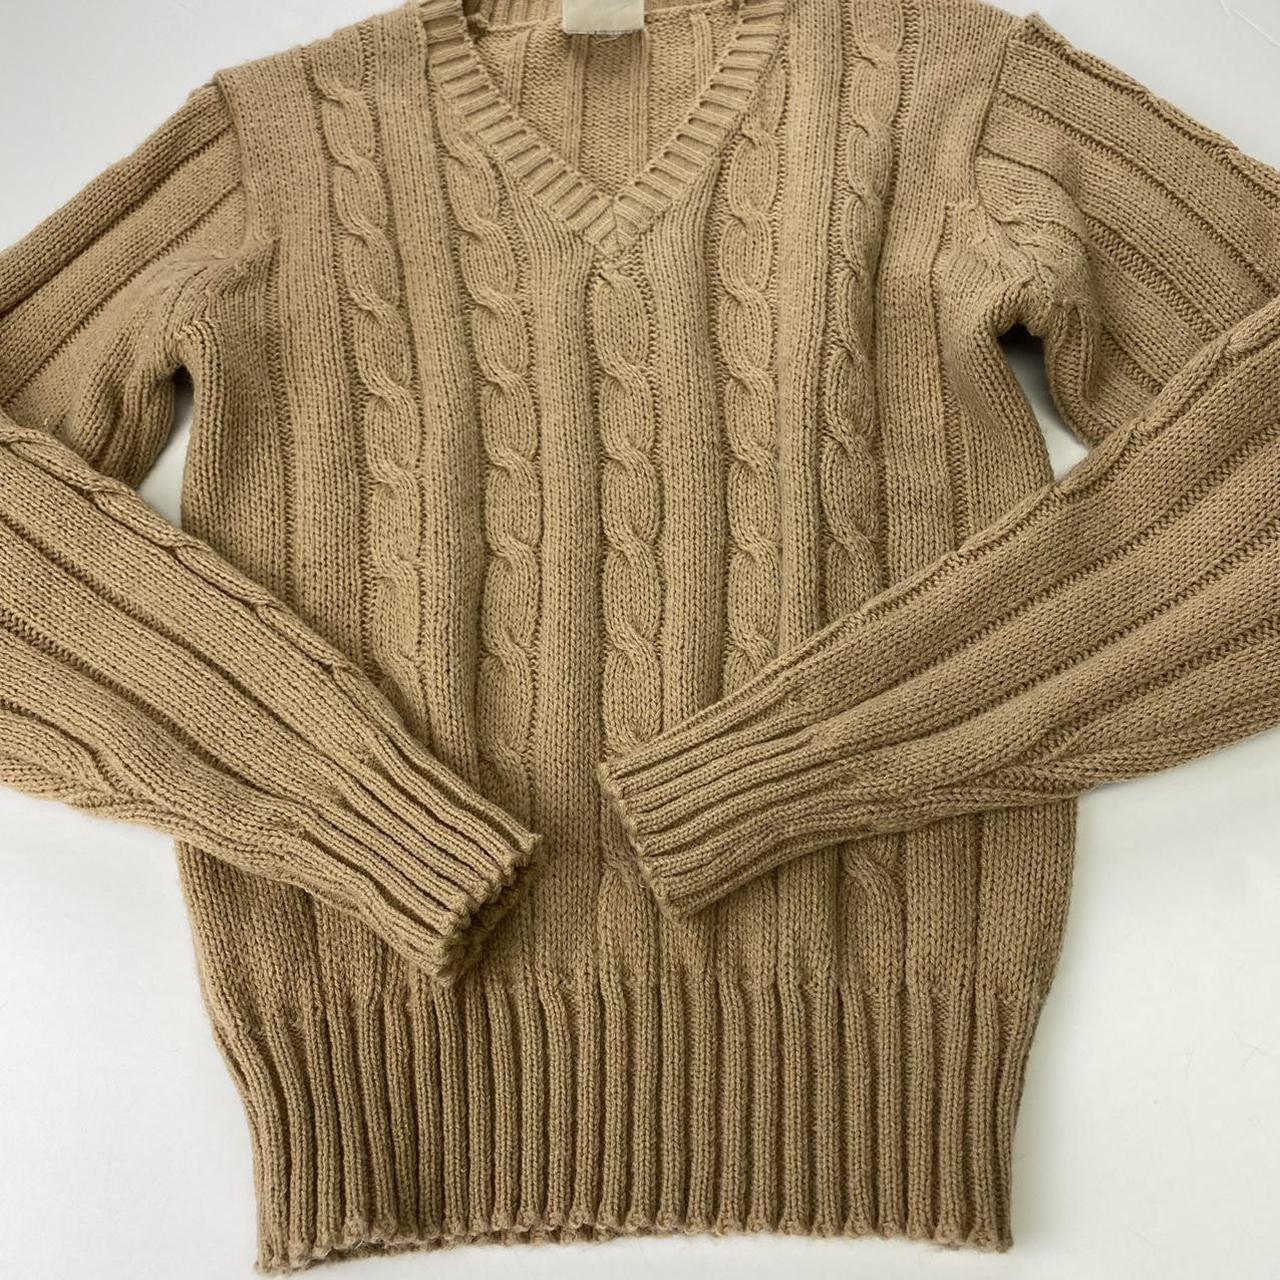 Product Image 2 - ☕️Cappuccino sweater☕️
Vintage 80s beige/brown cableknit